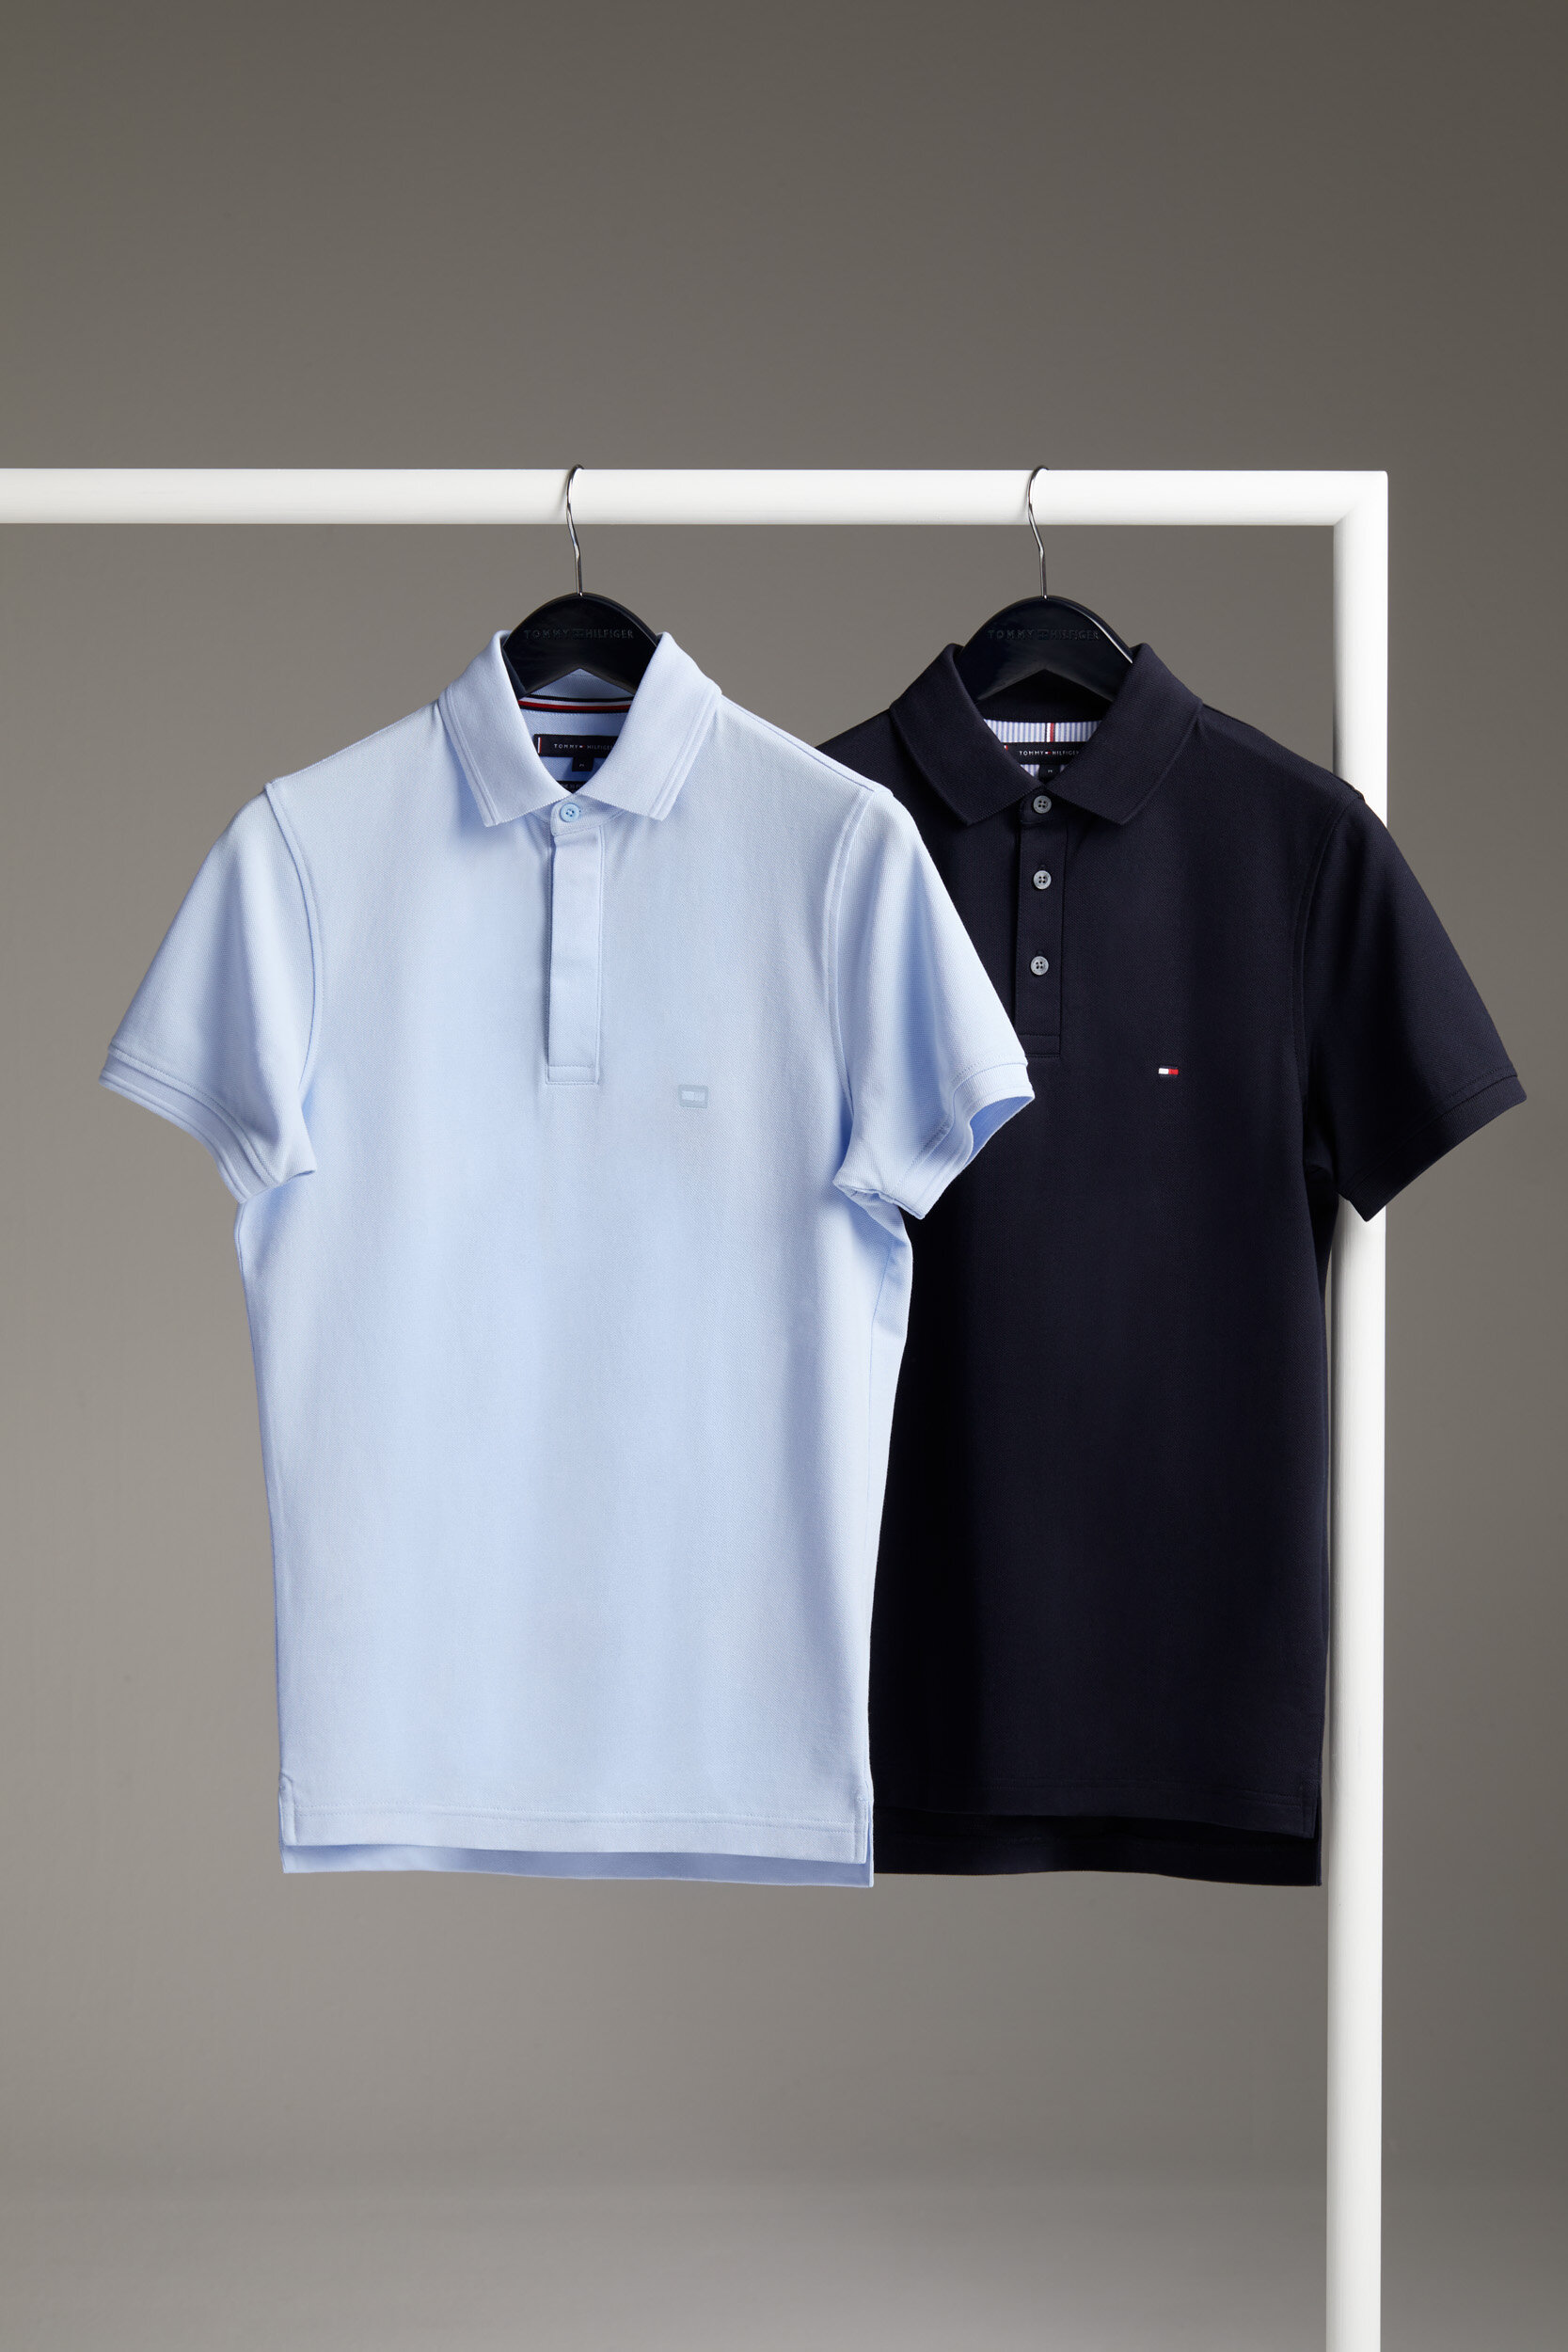 Menswear SSI Spring Life Polo 1985 2021 — Hilfiger The - Tommy